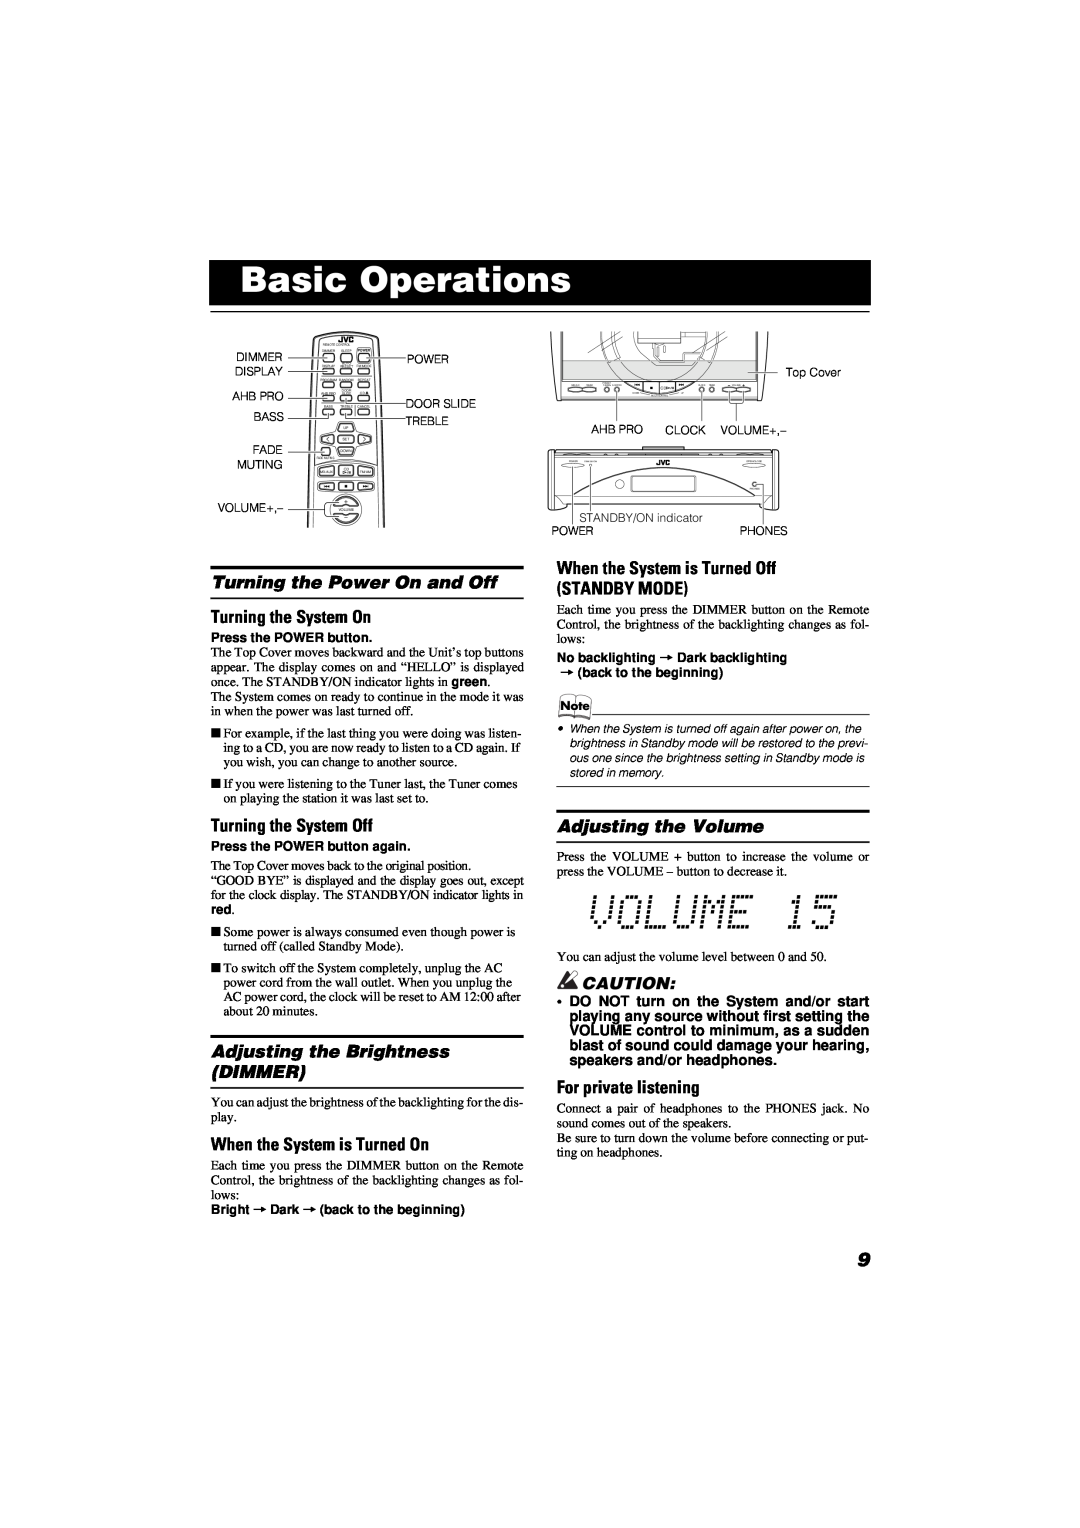 JVC FS-SD550, FS-SD990 manual Basic Operations, Turning the Power On and Off, Turning the System On, Turning the System Off 